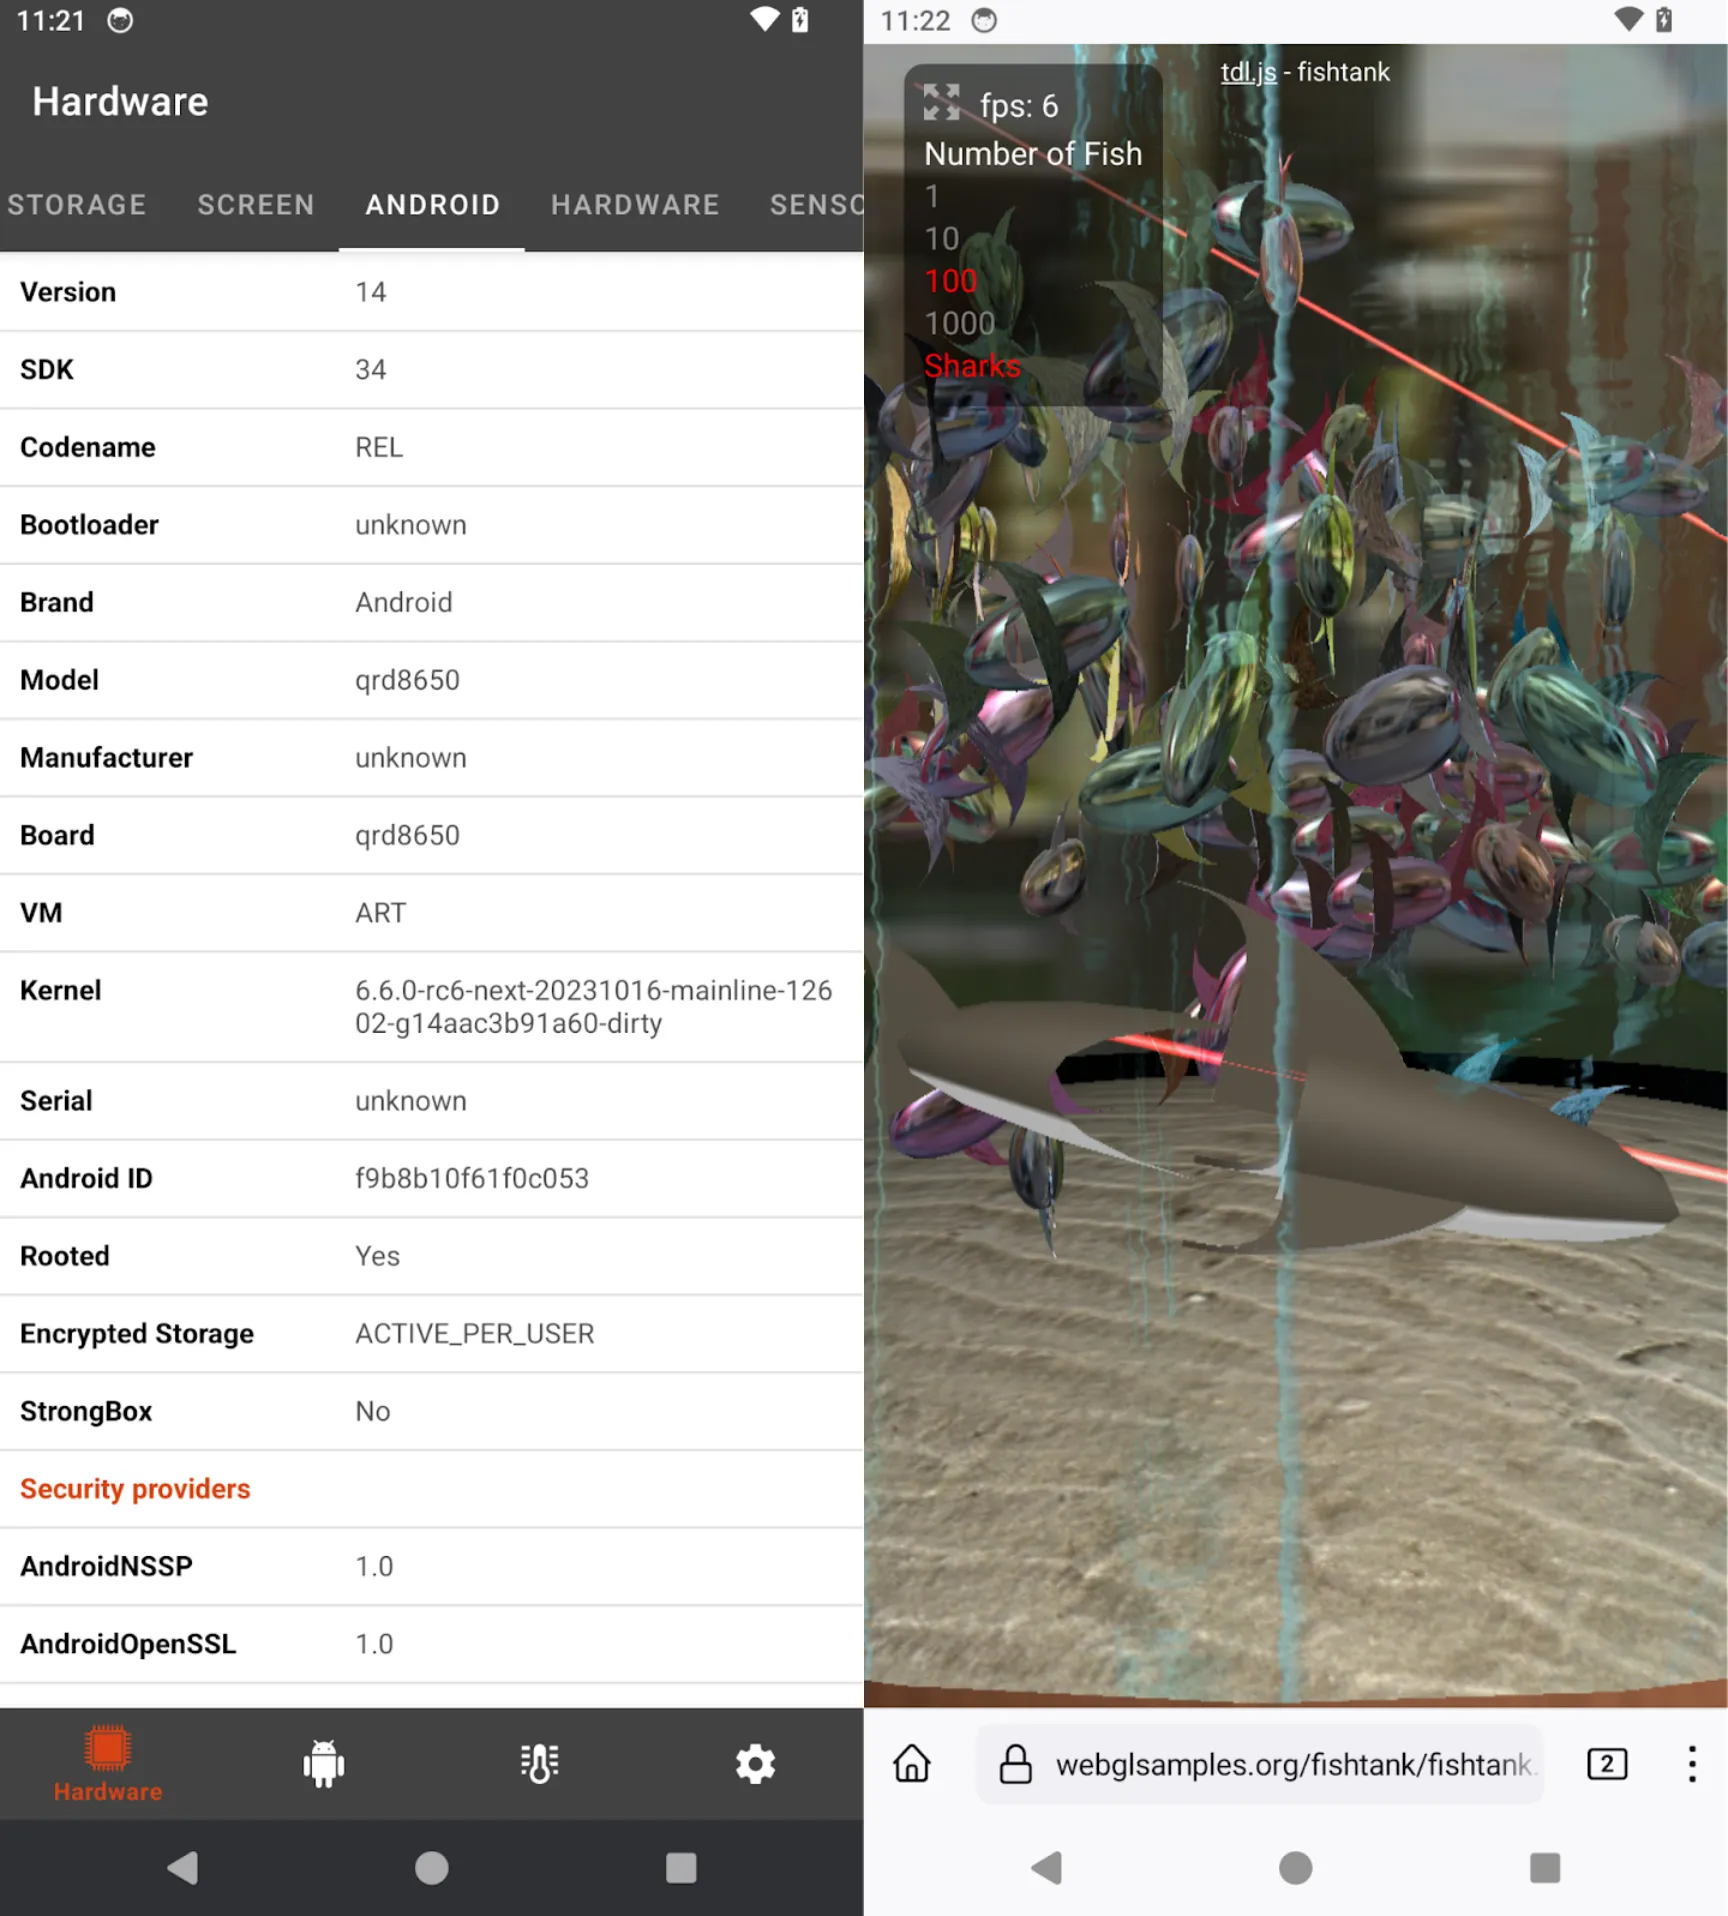 On the left Screenshot of CPU Info (open-source) App showing information on the running system. On the right: FishTank WebGL sample running in Firefox for Android